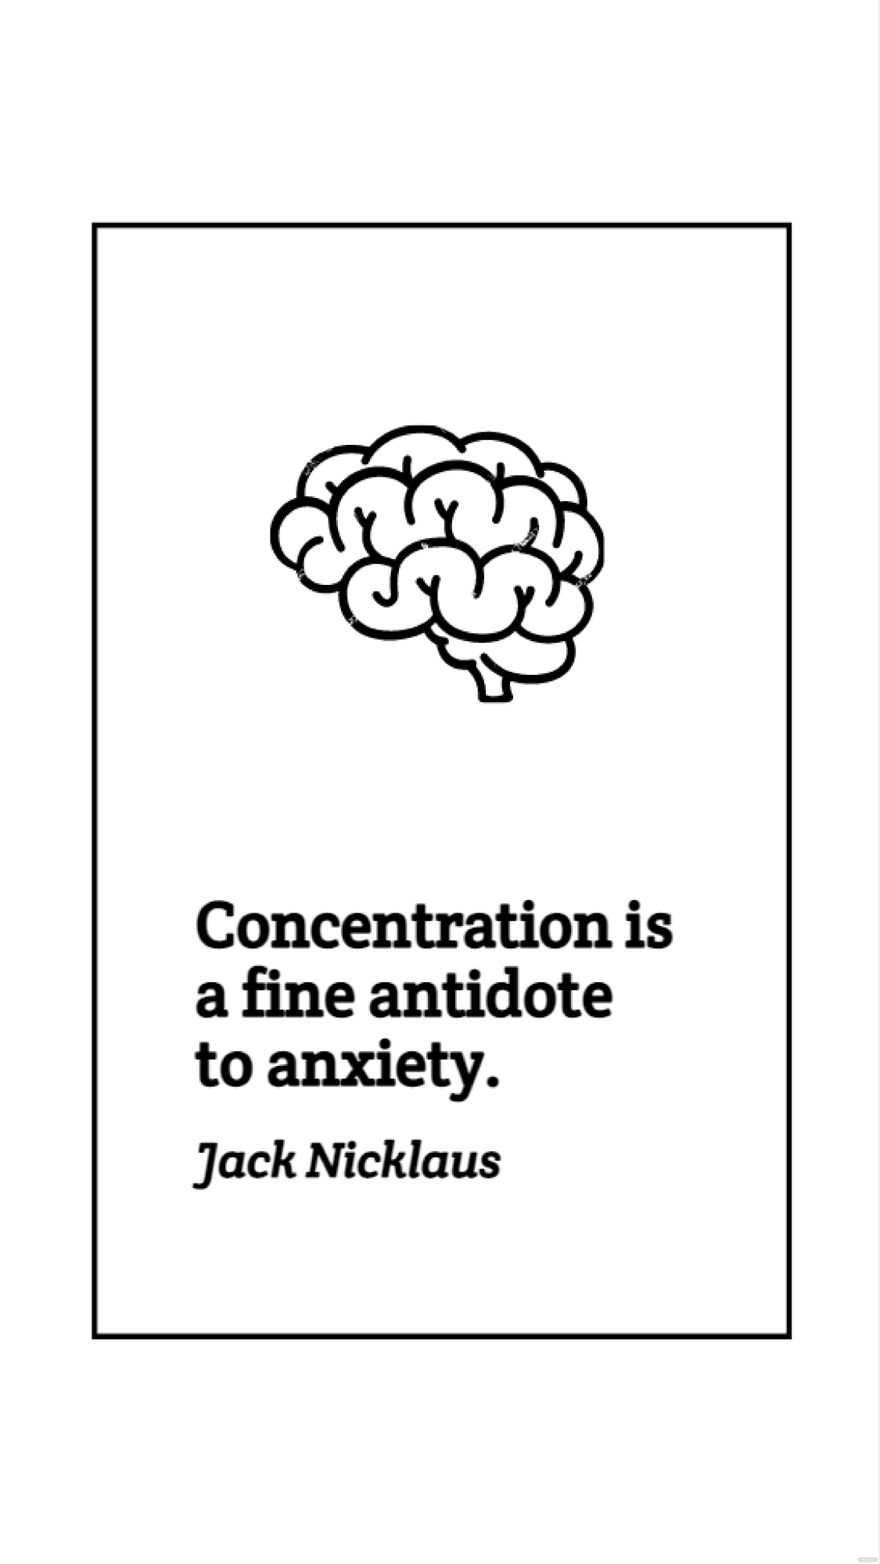 Jack Nicklaus - Concentration is a fine antidote to anxiety. in JPG